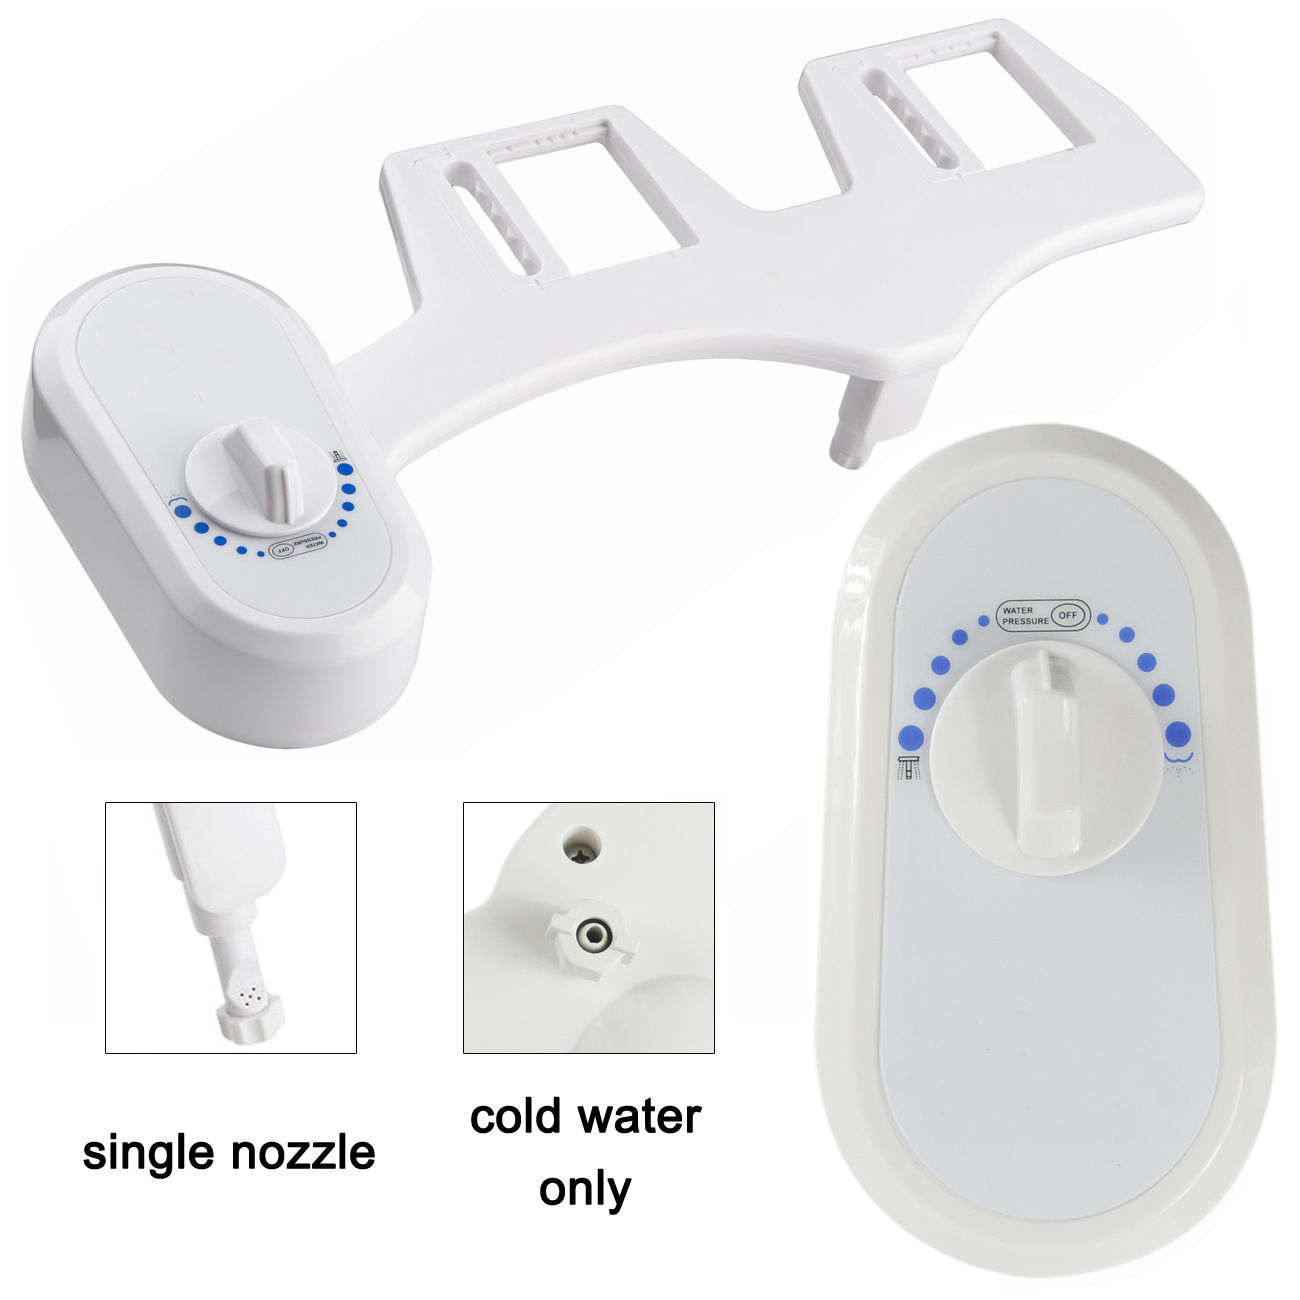 htd-non-electric-bidet-toilet-seat-attachment-one-nozzle-cold-water-cleaning